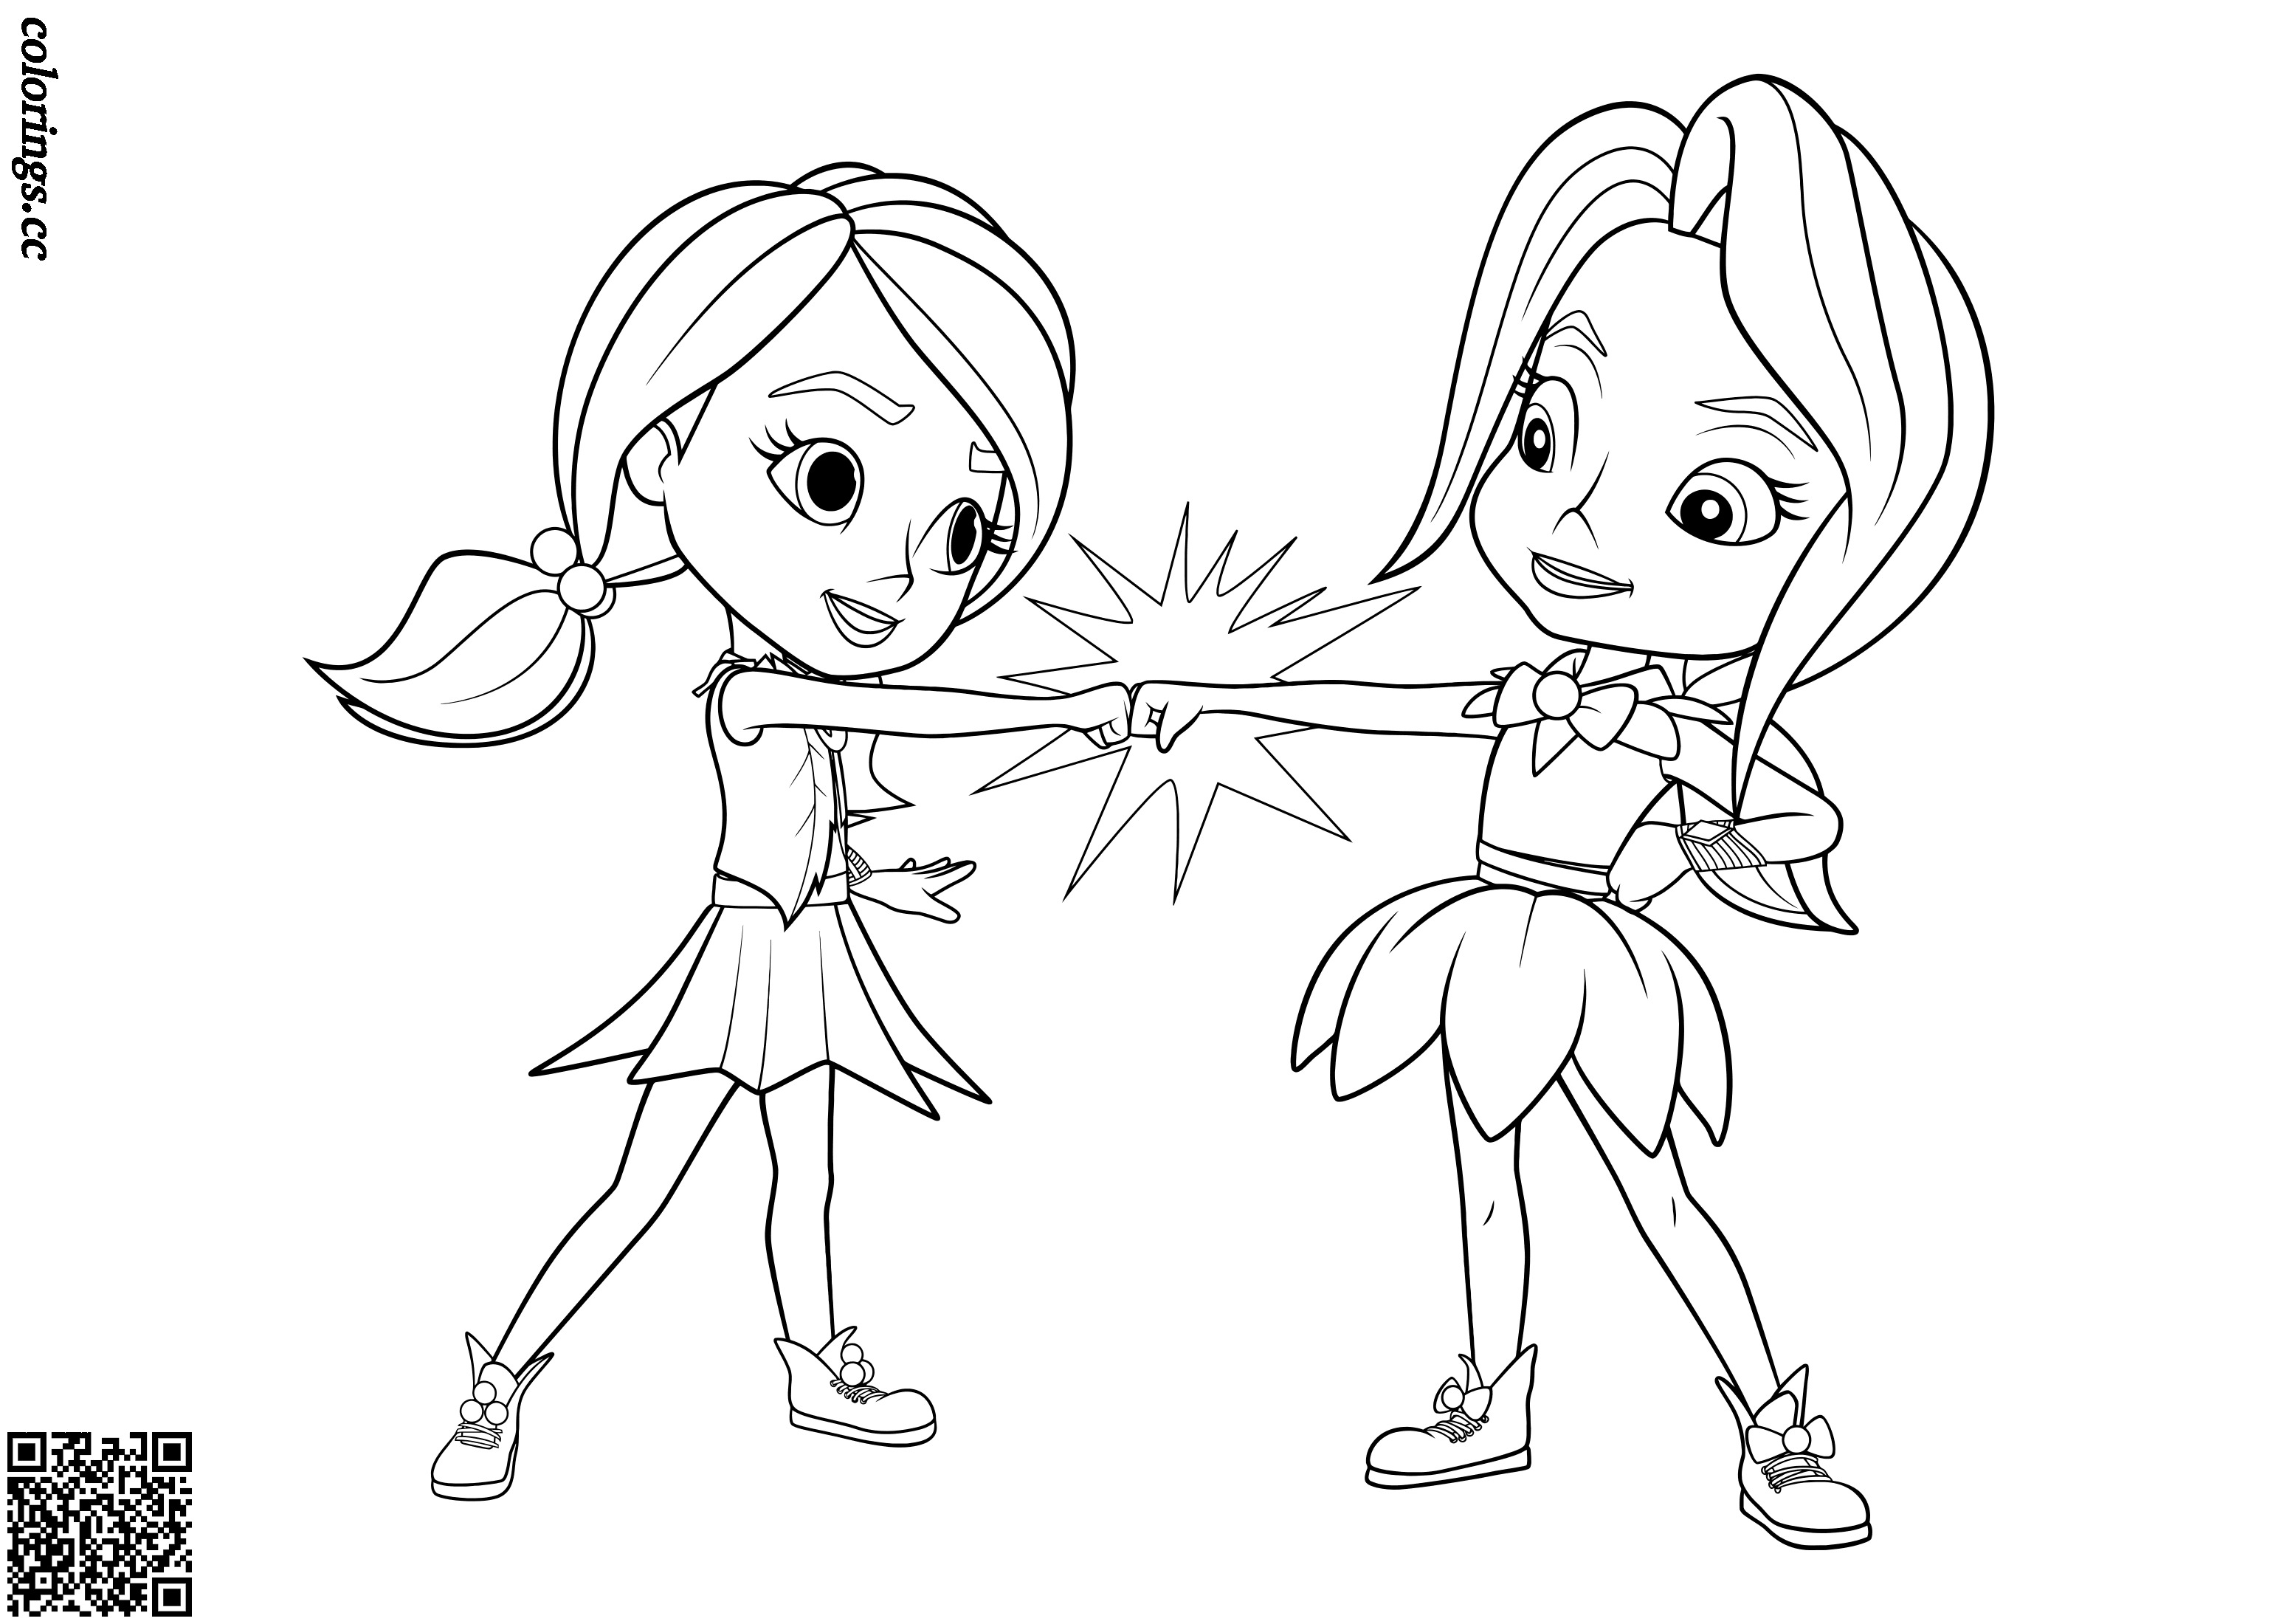 Bonnie and Indigo coloring pages, Rainbow Rangers coloring pages -  Colorings.cc